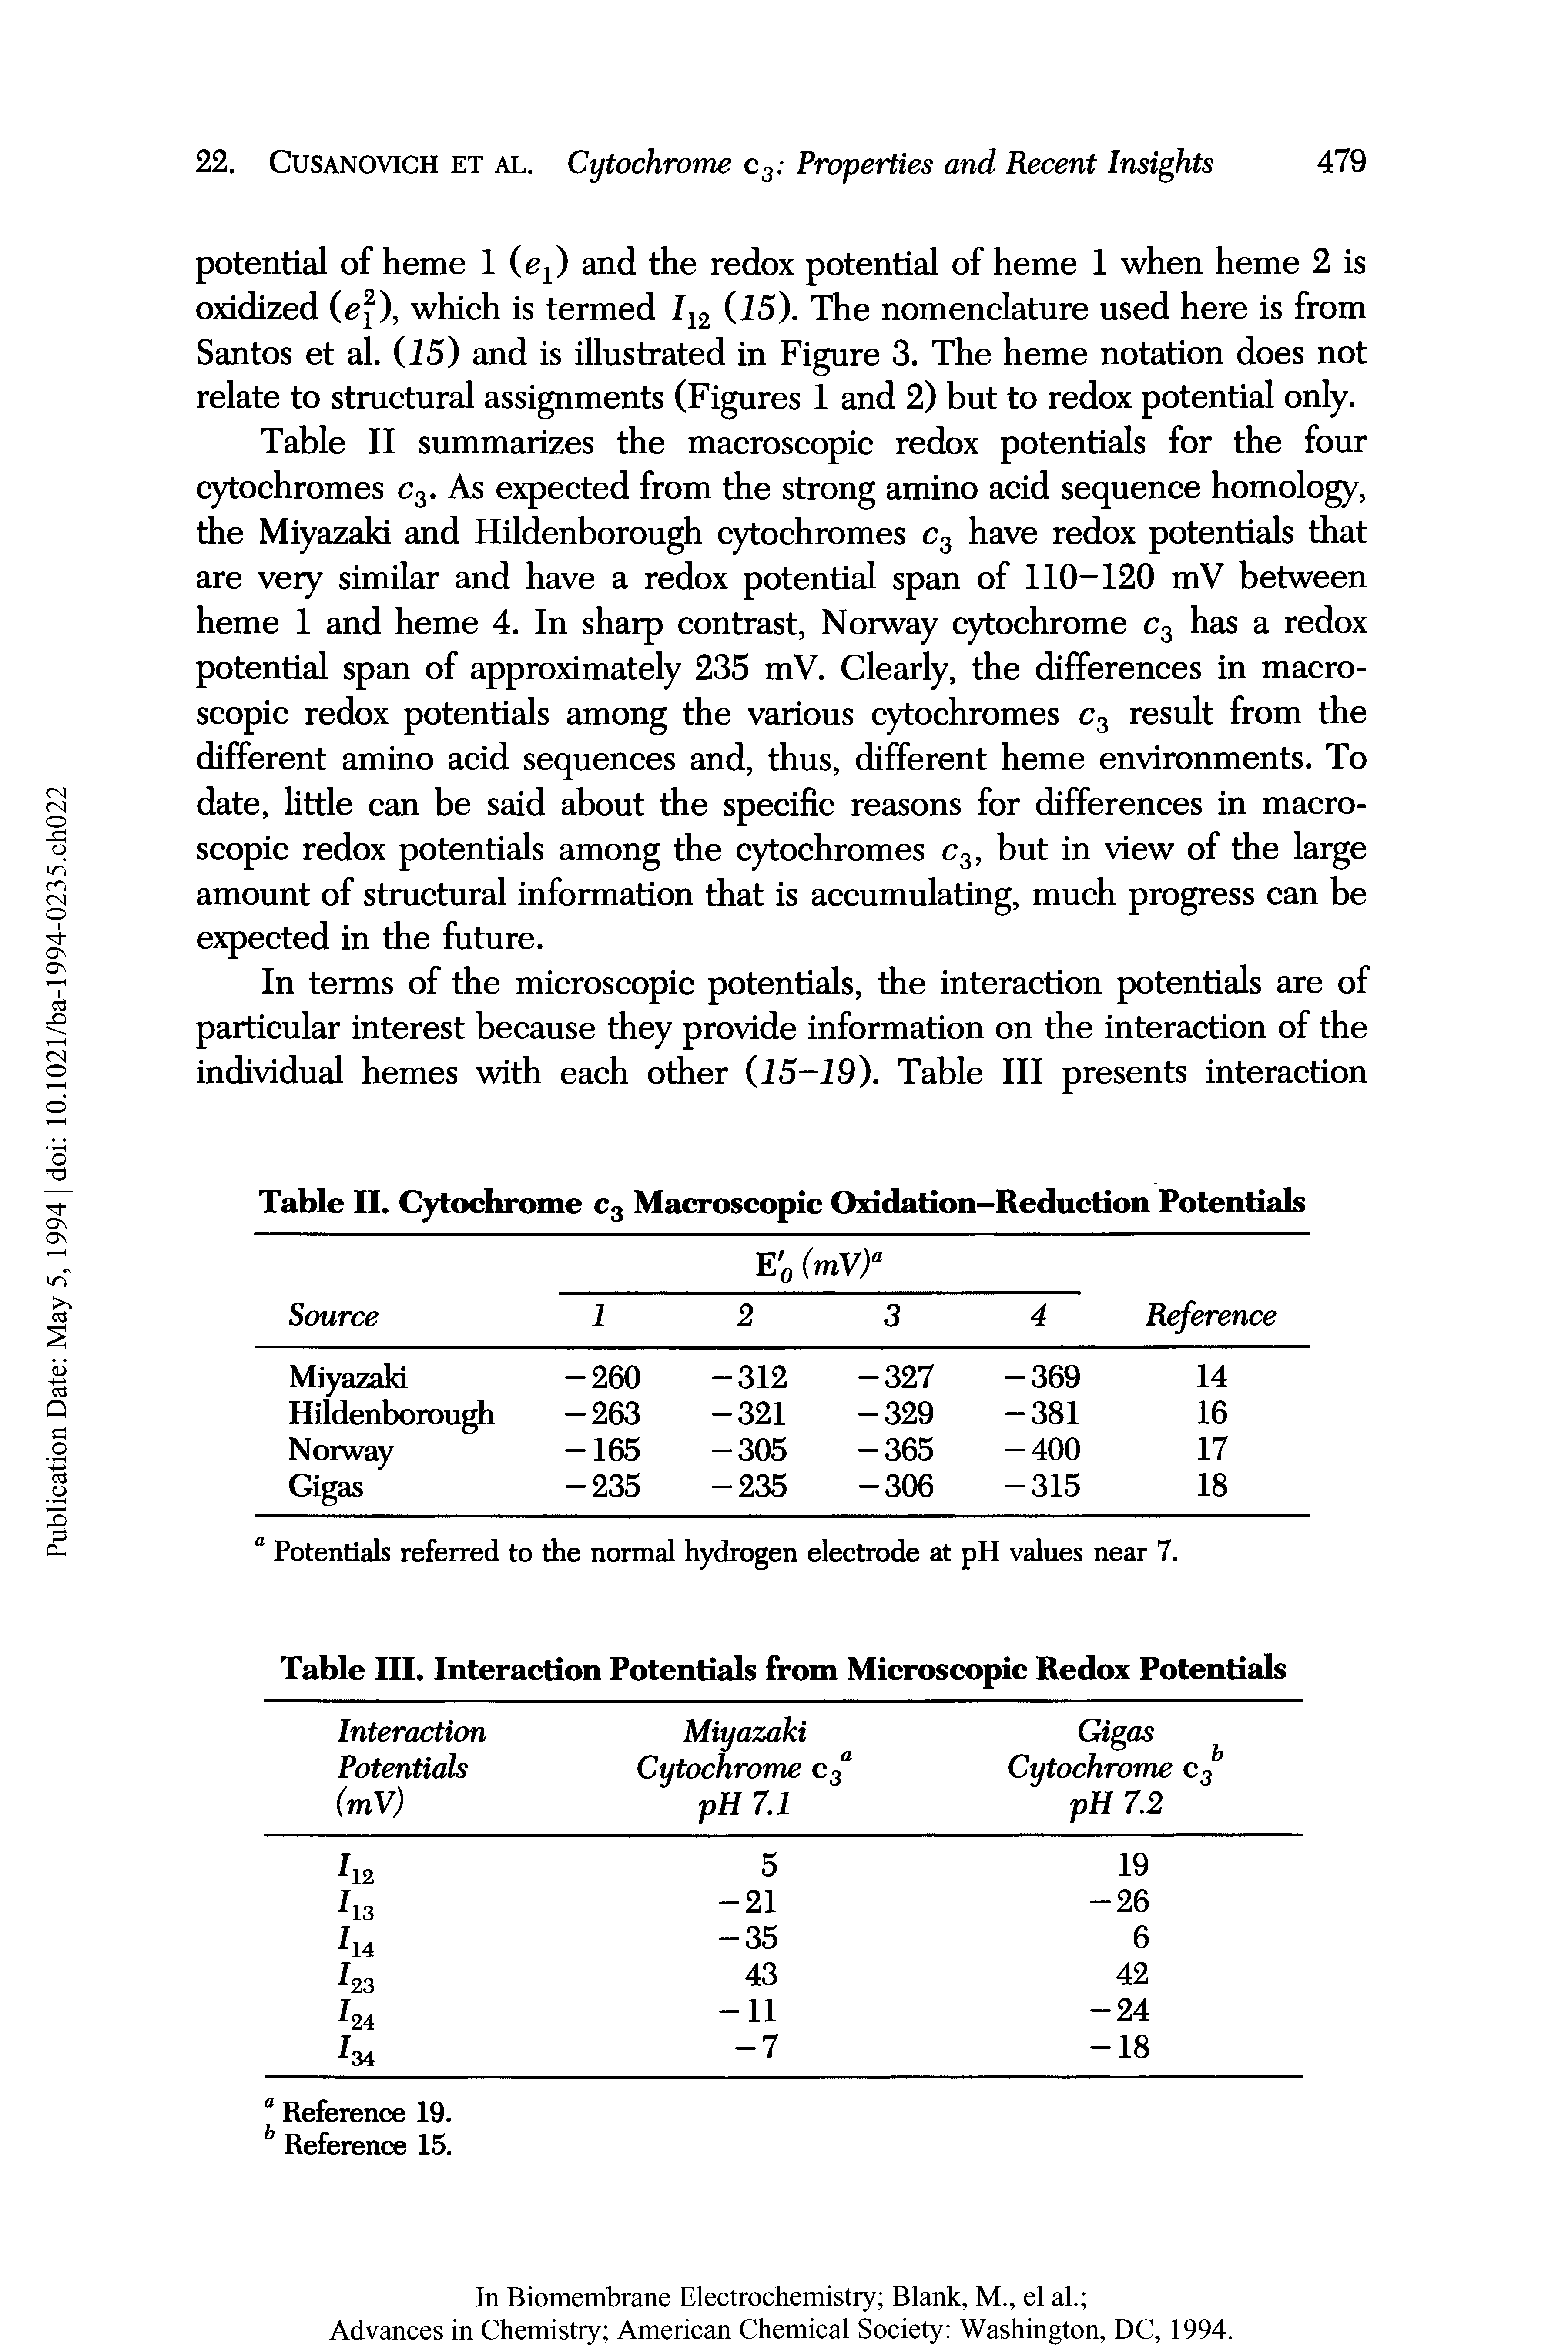 Table II summarizes the macroscopic redox potentials for the four cytochromes c3. As expected from the strong amino acid sequence homology, the Miyazaki and Hildenborough cytochromes c3 have redox potentials that are very similar and have a redox potential span of 110-120 mV between heme 1 and heme 4. In sharp contrast, Norway cytochrome c3 has a redox potential span of approximately 235 mV. Clearly, the differences in macroscopic redox potentials among the various cytochromes c3 result from the different amino acid sequences and, thus, different heme environments. To date, little can be said about the specific reasons for differences in macroscopic redox potentials among the cytochromes c3, but in view of the large amount of structural information that is accumulating, much progress can be expected in the future.